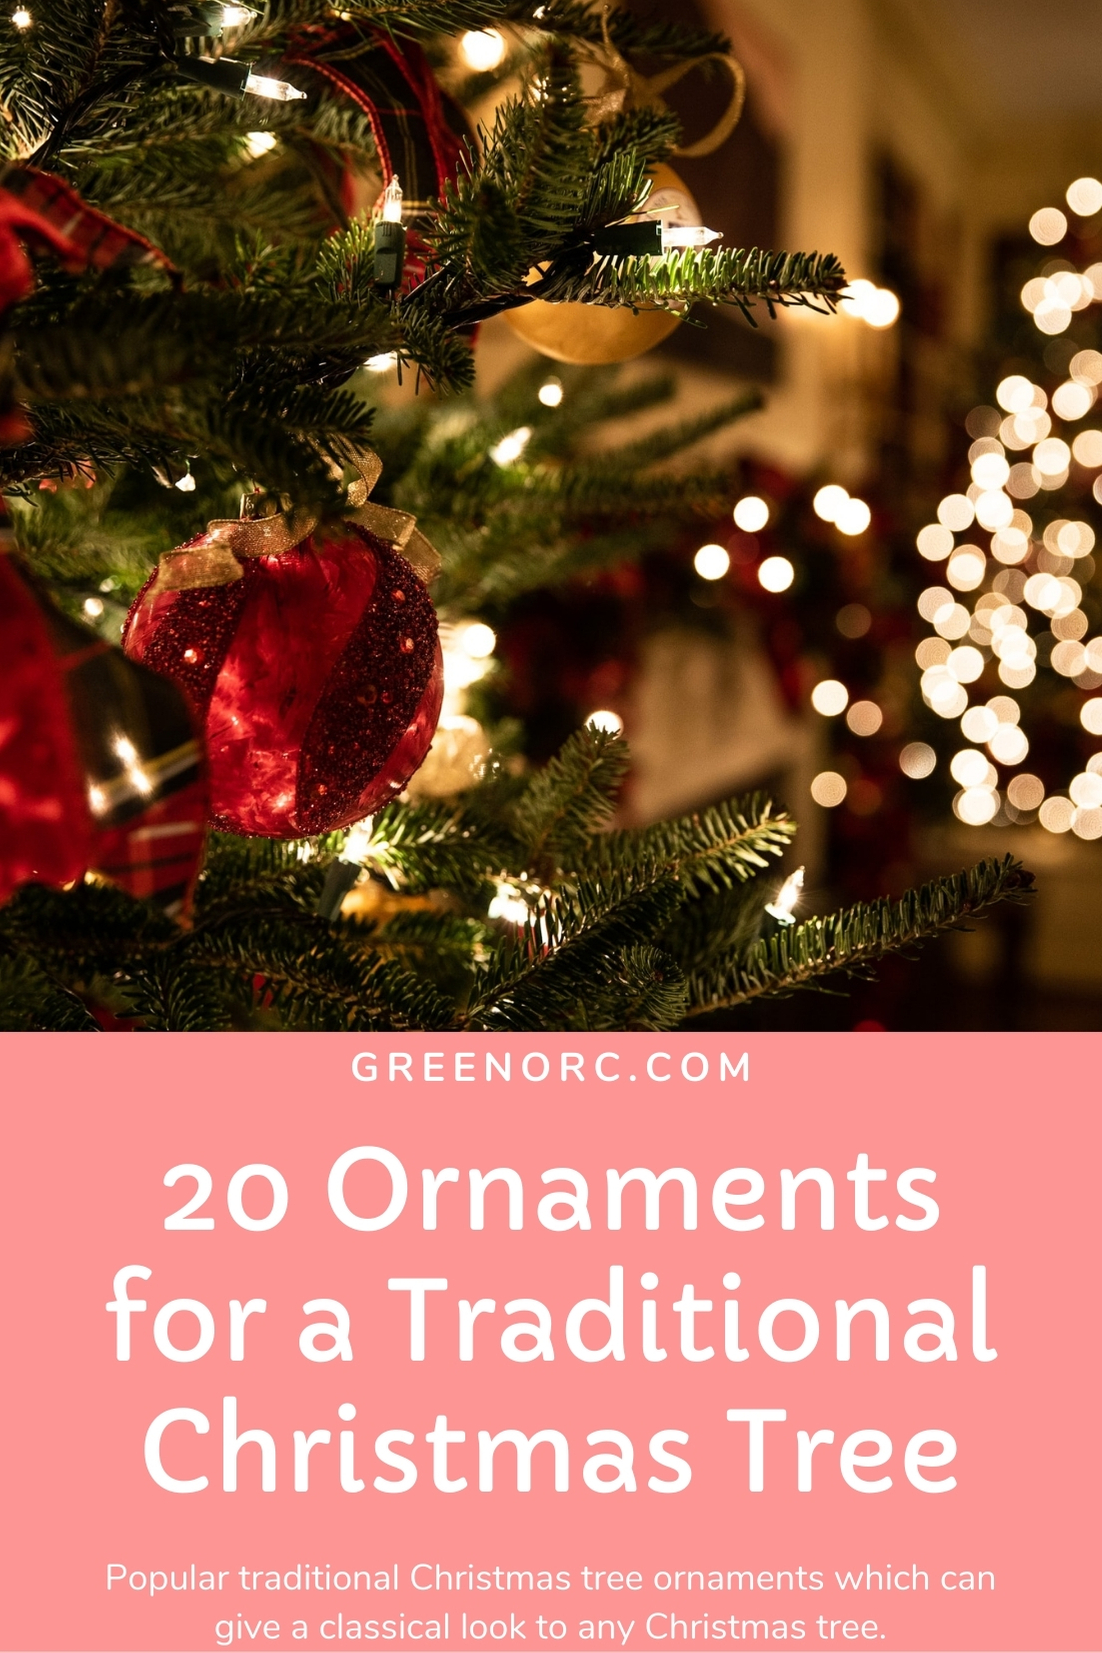 Ornaments for a traditional Christmas tree